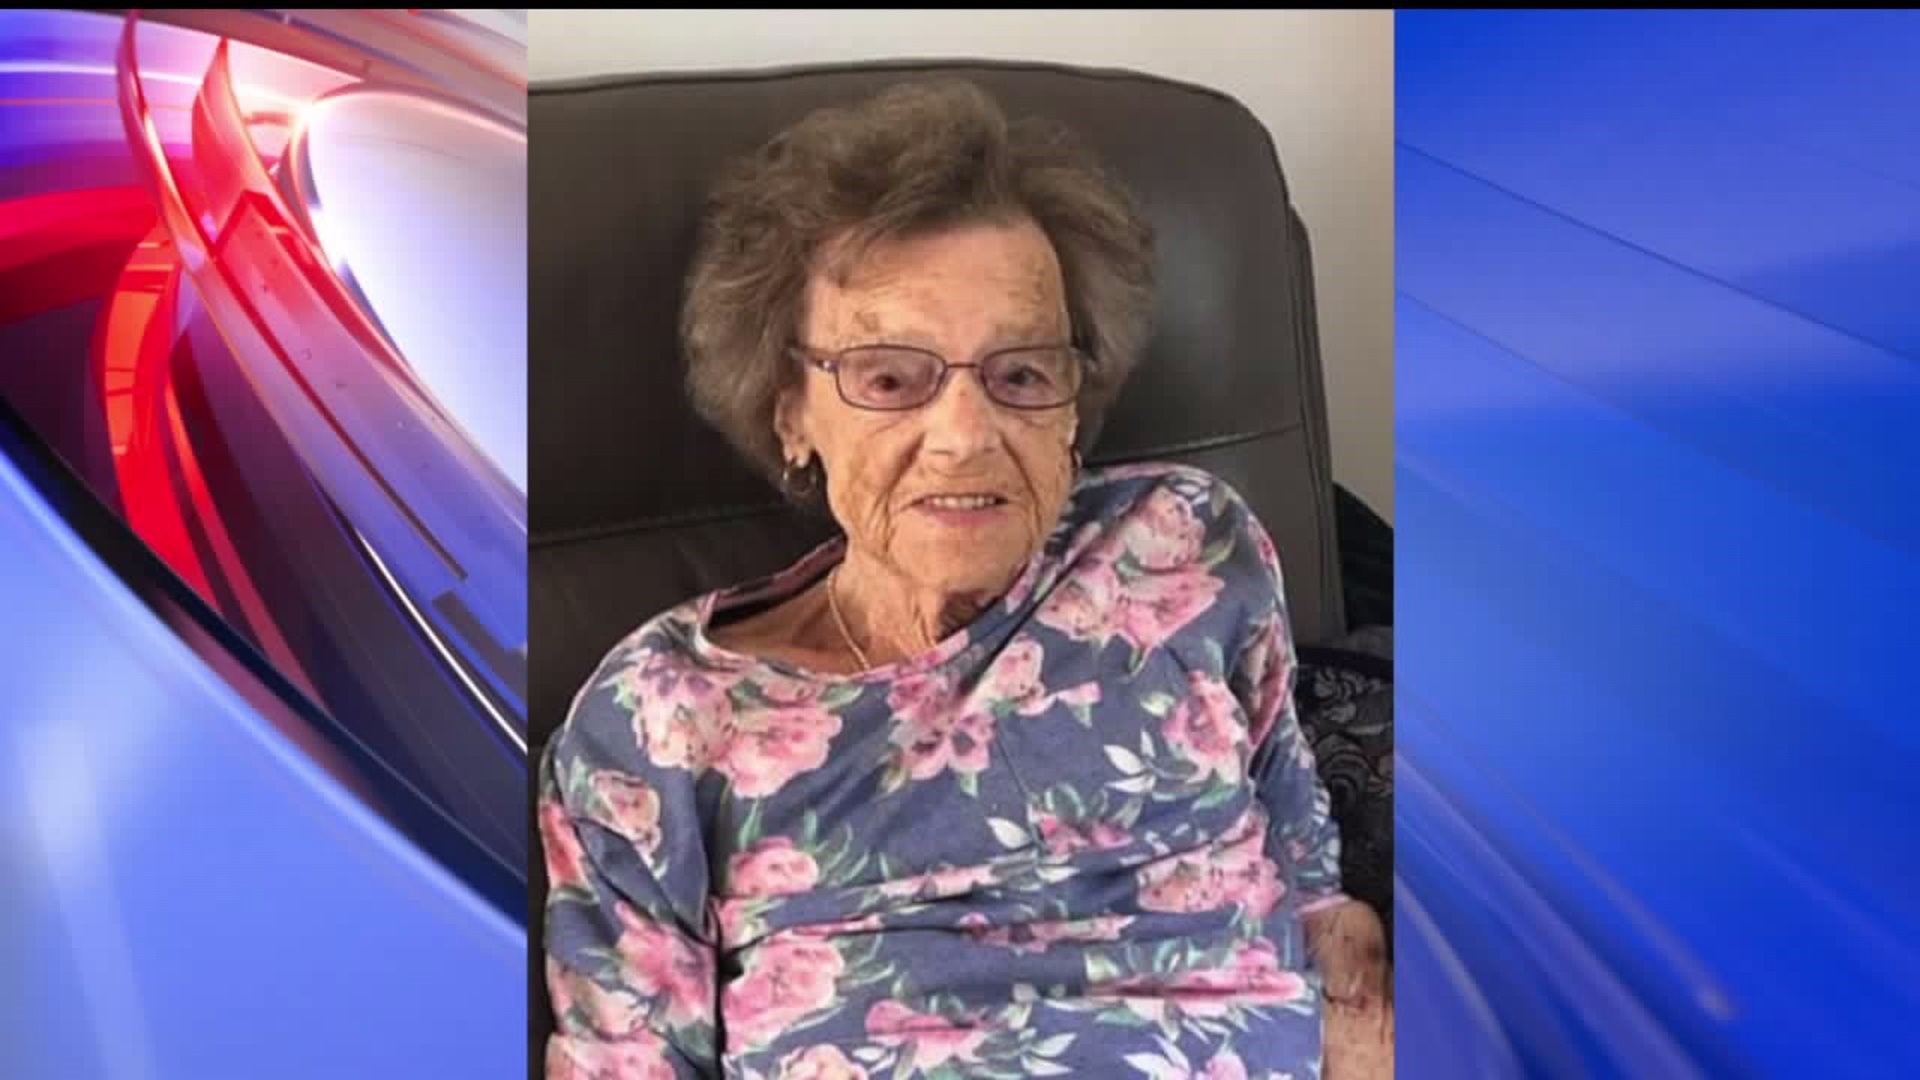 93-year-old woman dies from broken heart syndrome after burglars ransack her home